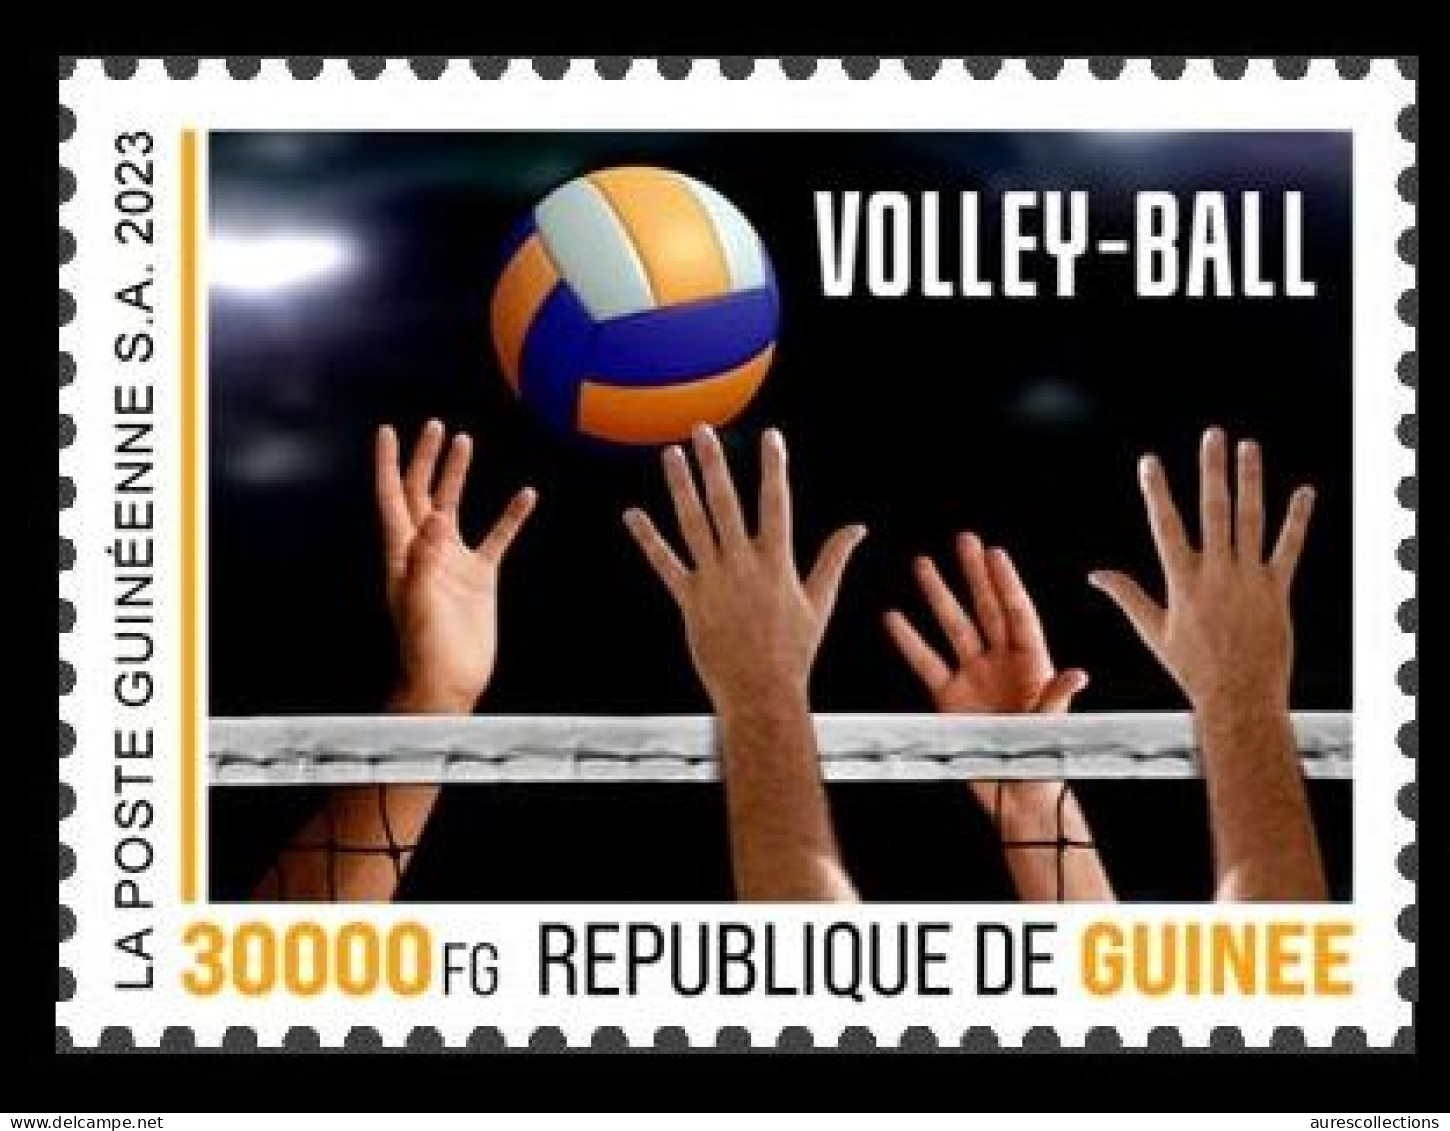 GUINEA 2023 STAMP 1V - OLYMPIC GAMES PARIS FRANCE 2024 - VOLLEY BALL VOLLEYBALL - MNH - Volleybal